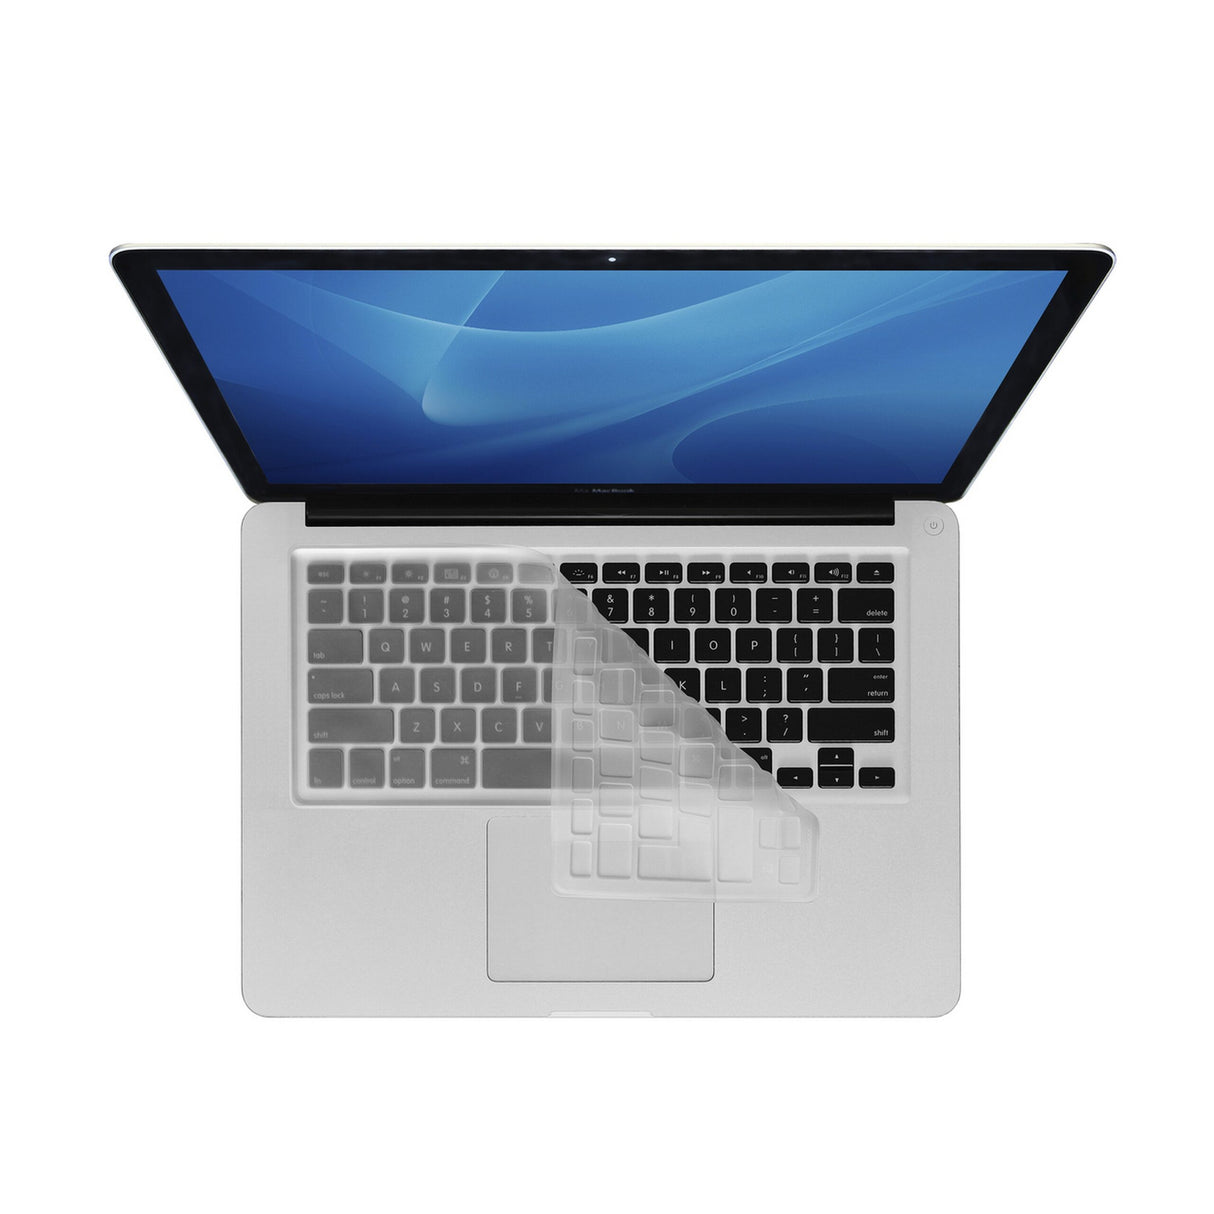 KB Covers CV-M-Clear-2 Clear Keyboard Cover for MacBook/Air 13/Pro 2008+/Retina and Wireless (Used)